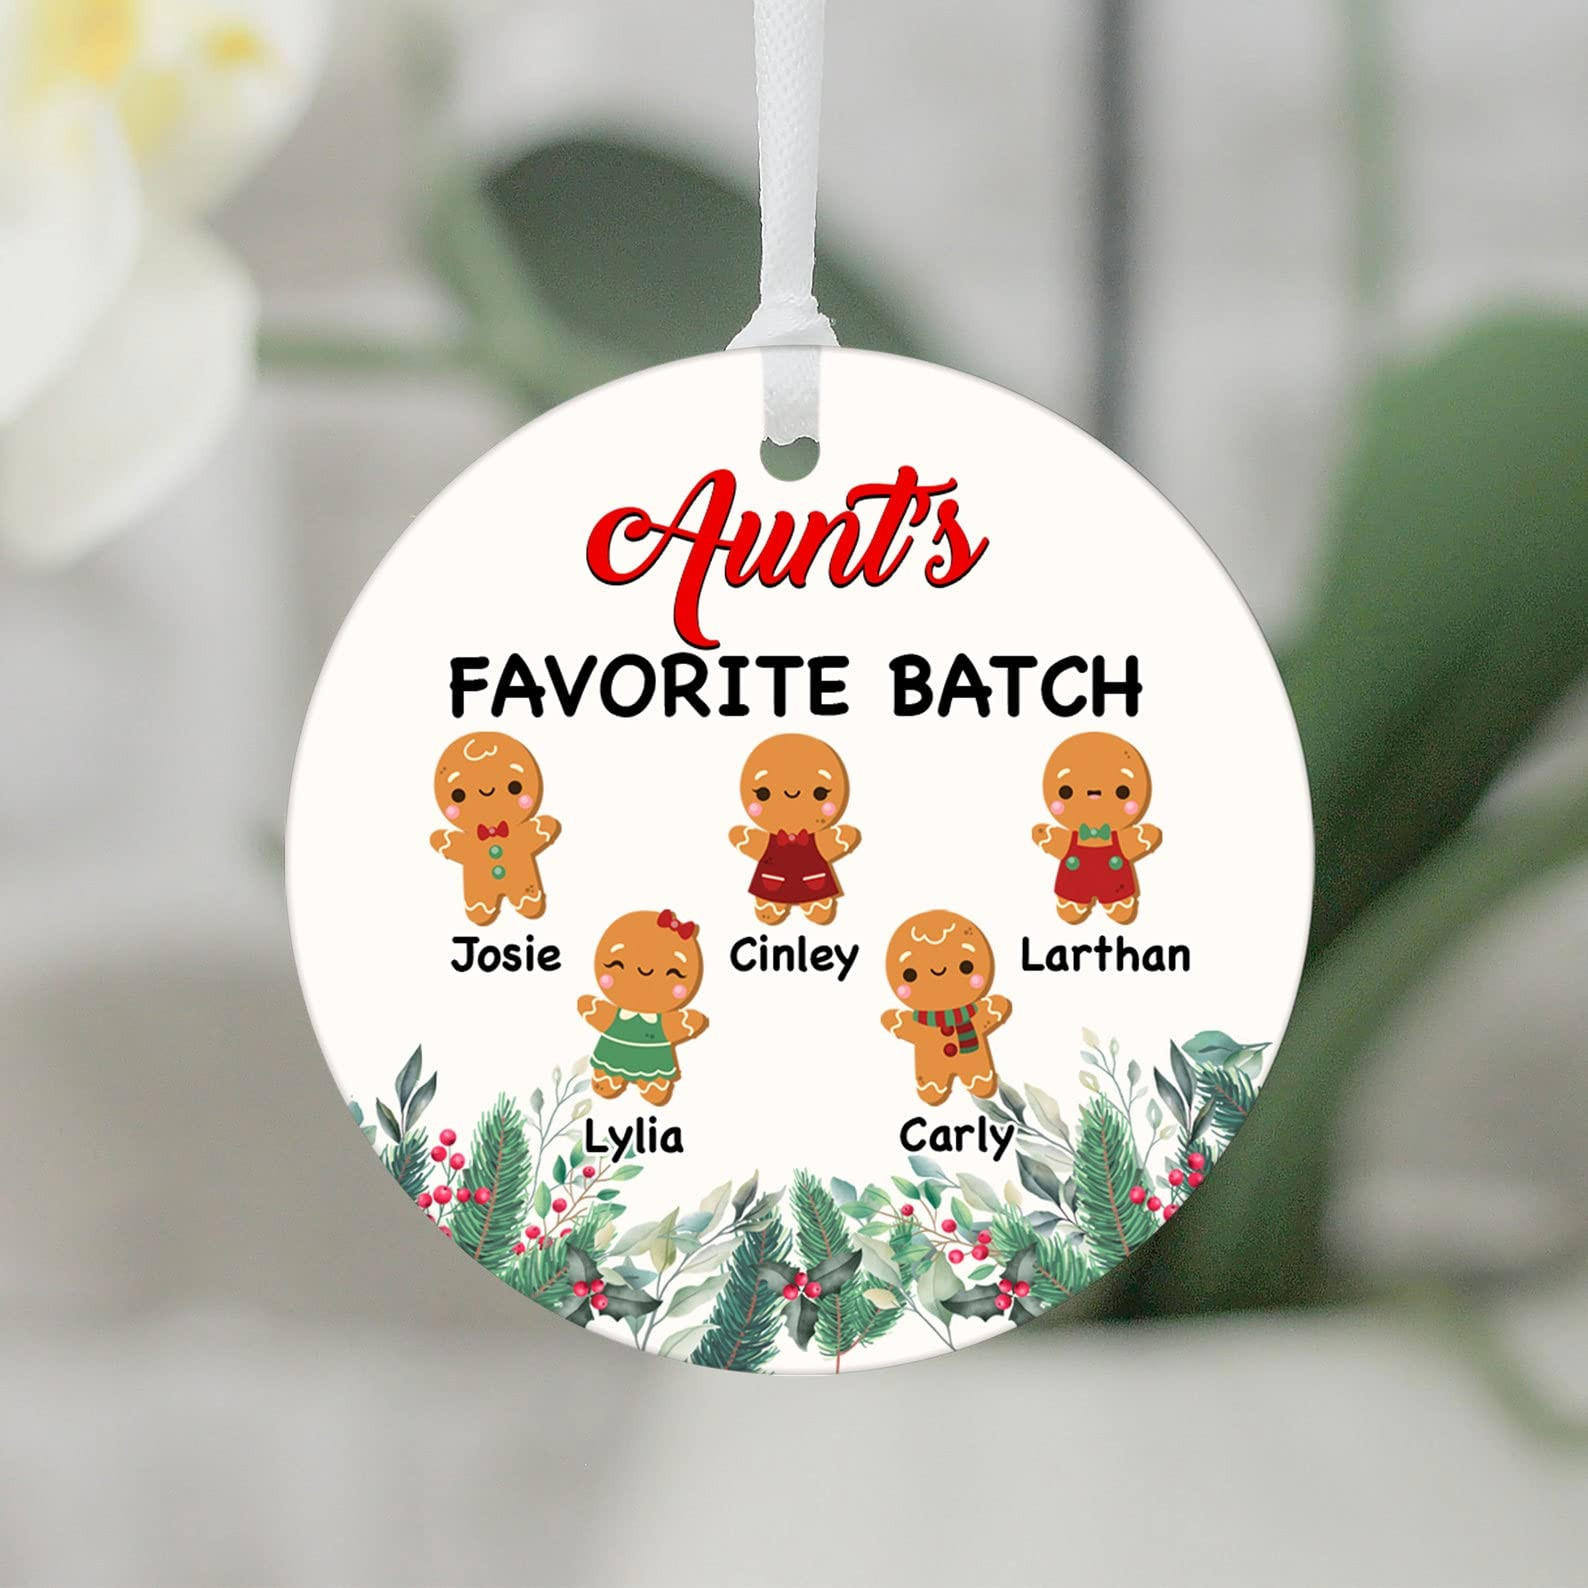 Personalized Aunts Little Reindeer Ornament 2021 Custom Nieces Nephews Name Gifts Reindeer Christmas Ornament For Aunt Hanging Decoration Xmas Tree Decoration